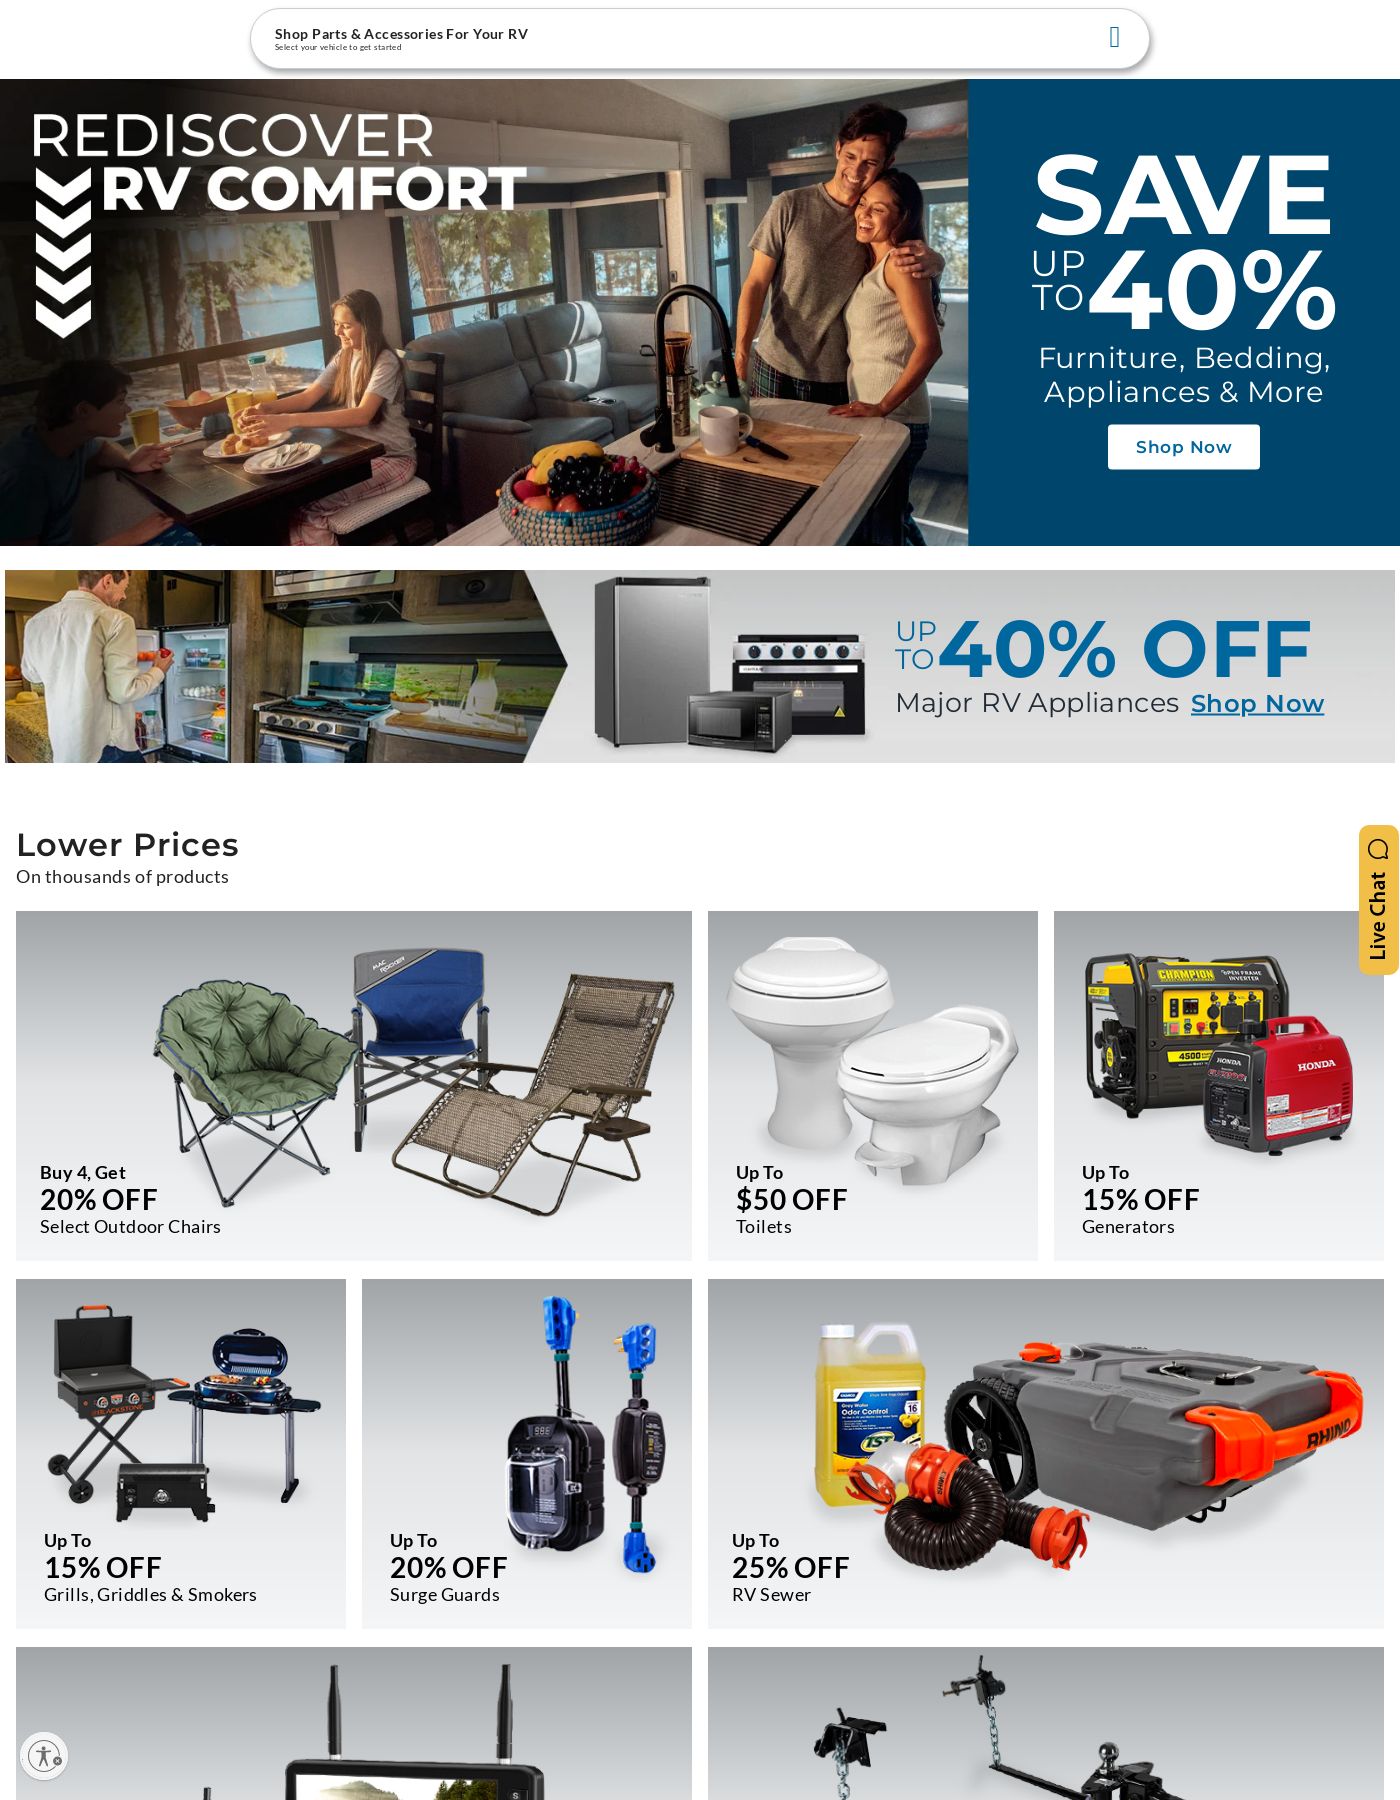 Camping World Promotional weekly ads